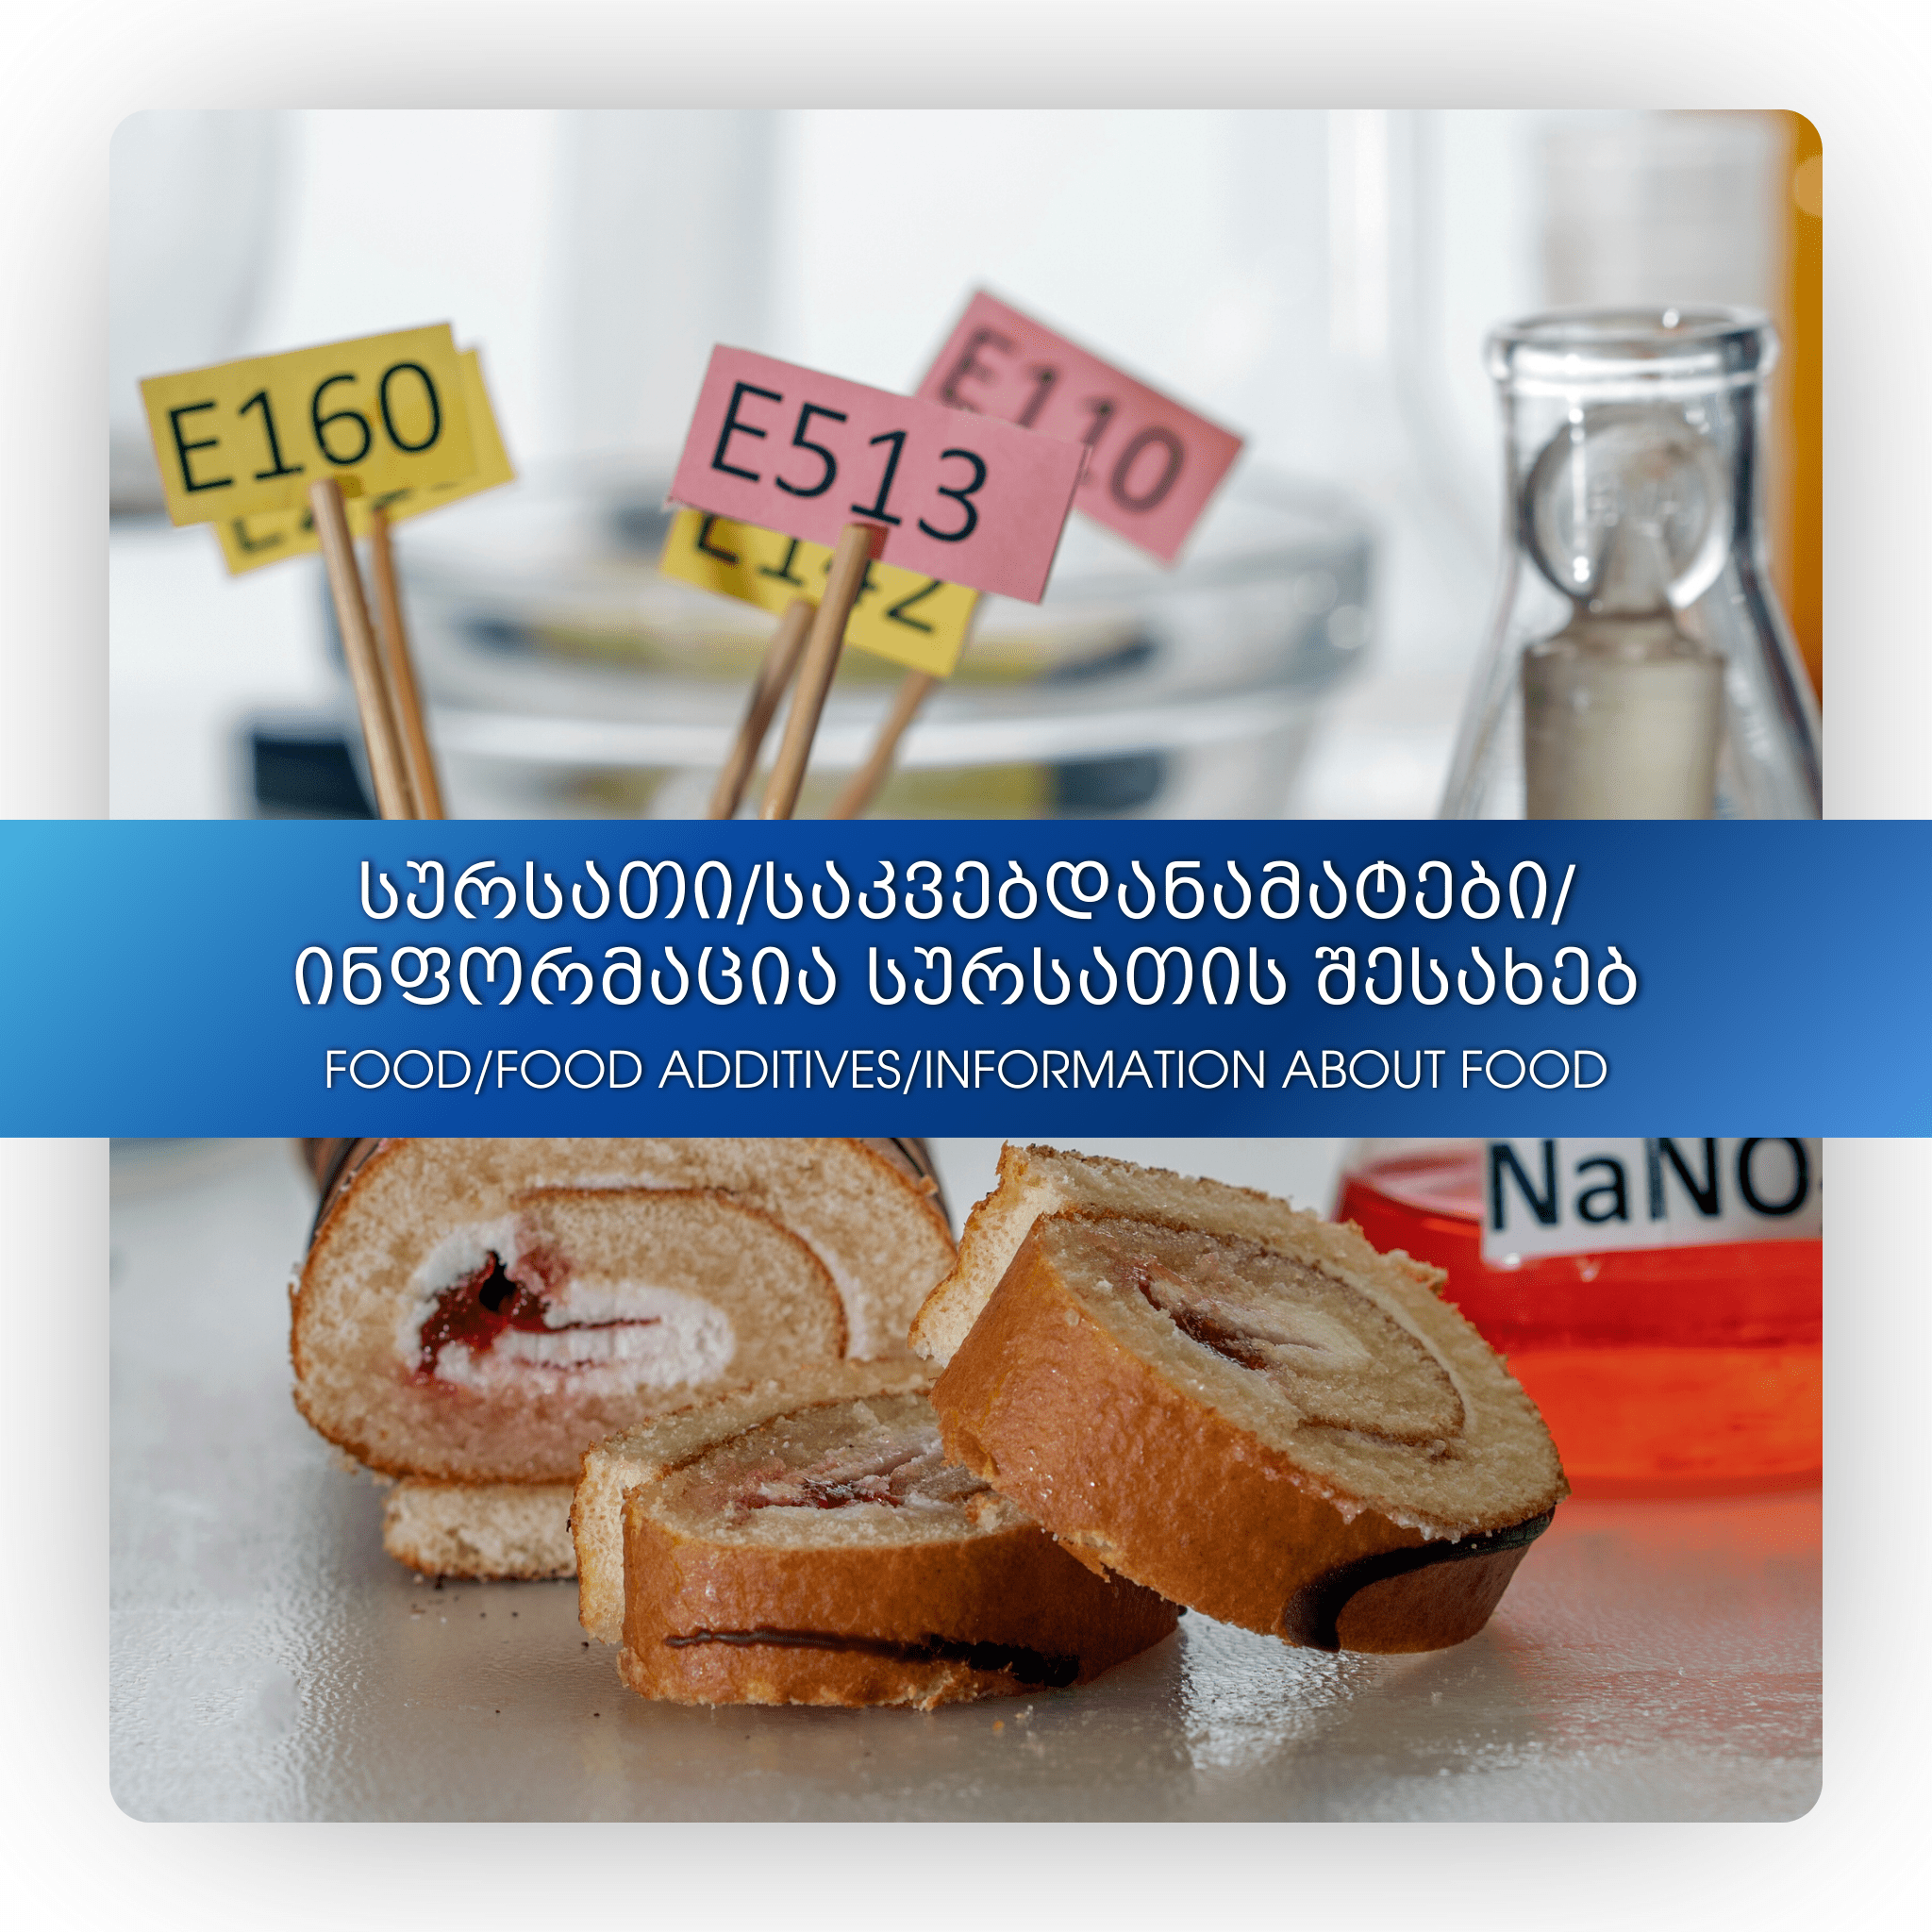 Food/Food additives/Information About Food